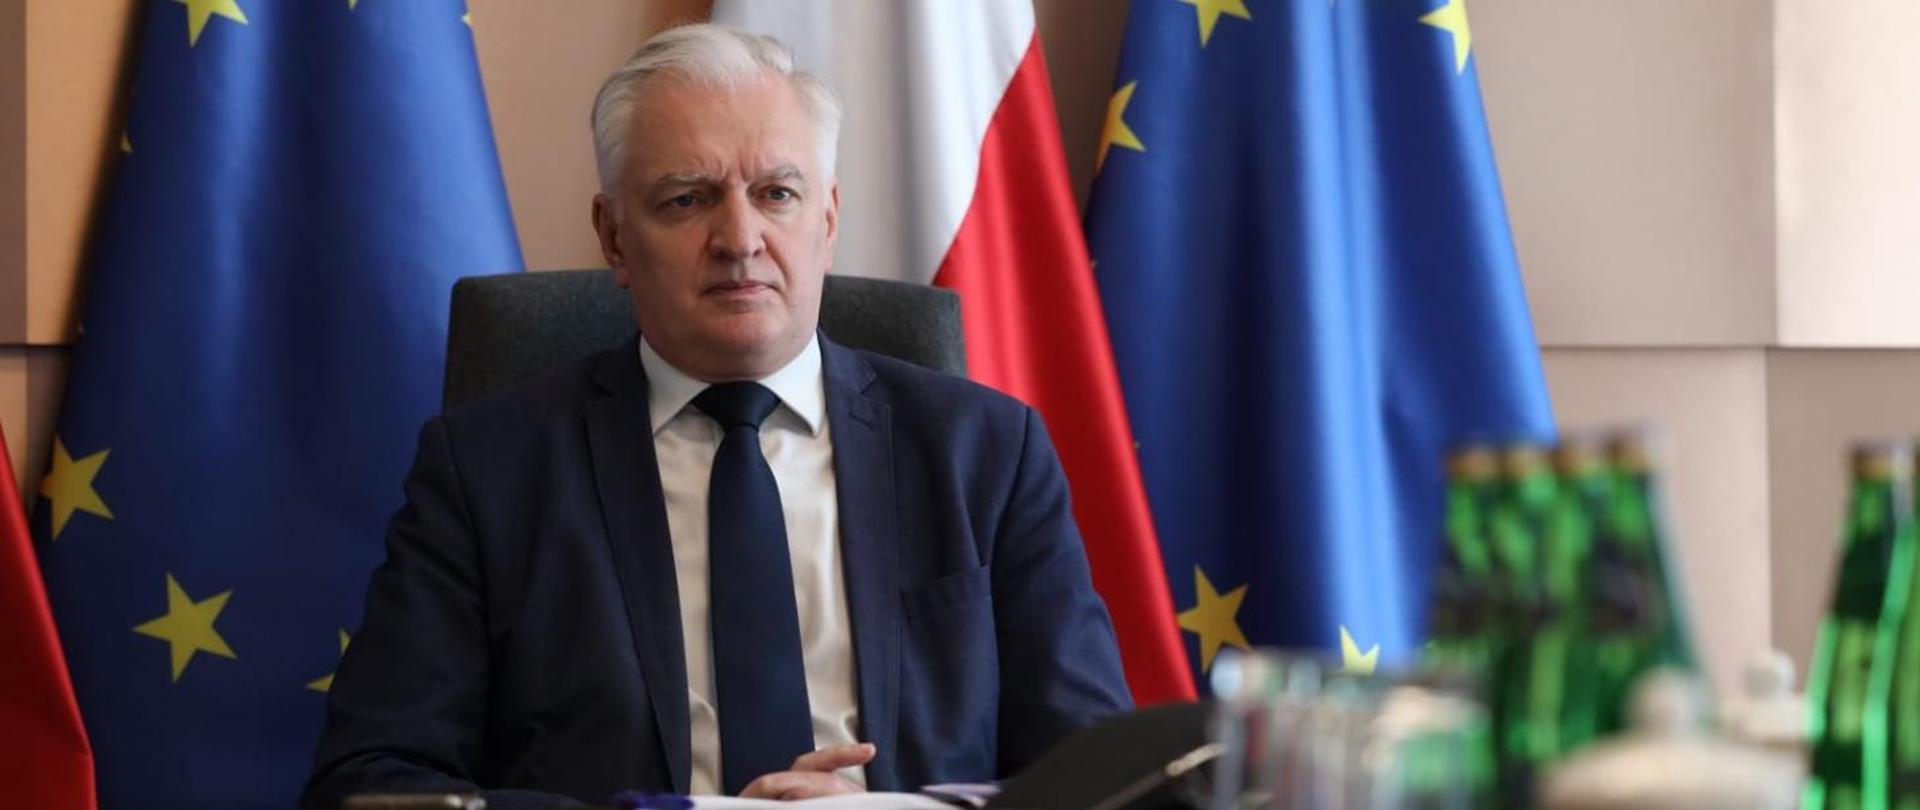 Deputy Prime Minister Jarosław Gowin at the meeting of economic ministers of the Berlin Process countries - Polish and EU flags in the background